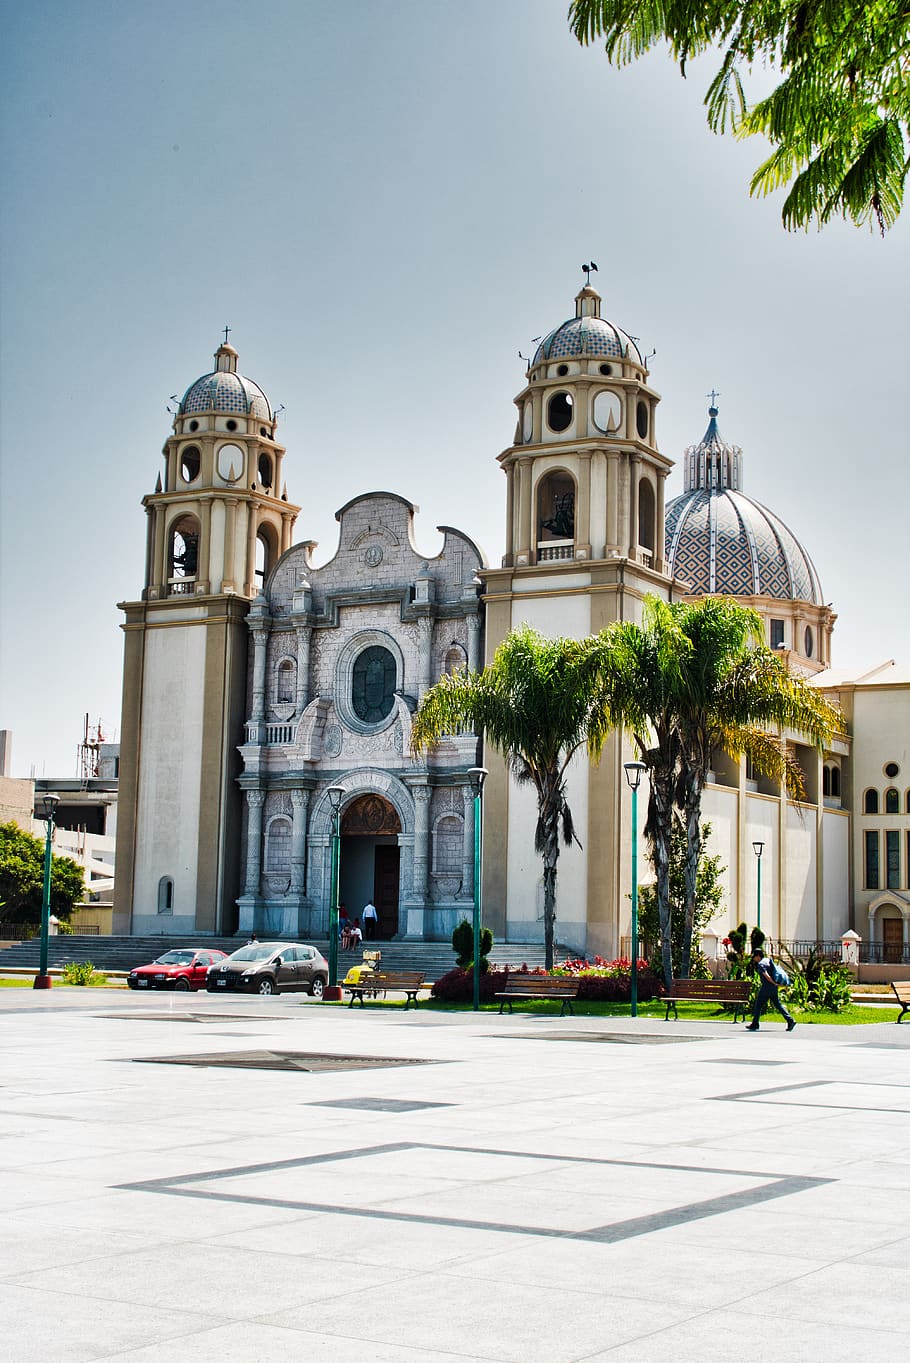 chimbote, plaza de armas, plaza, weapons, new chimbote, rico, architecture, tourism, traveller, cool